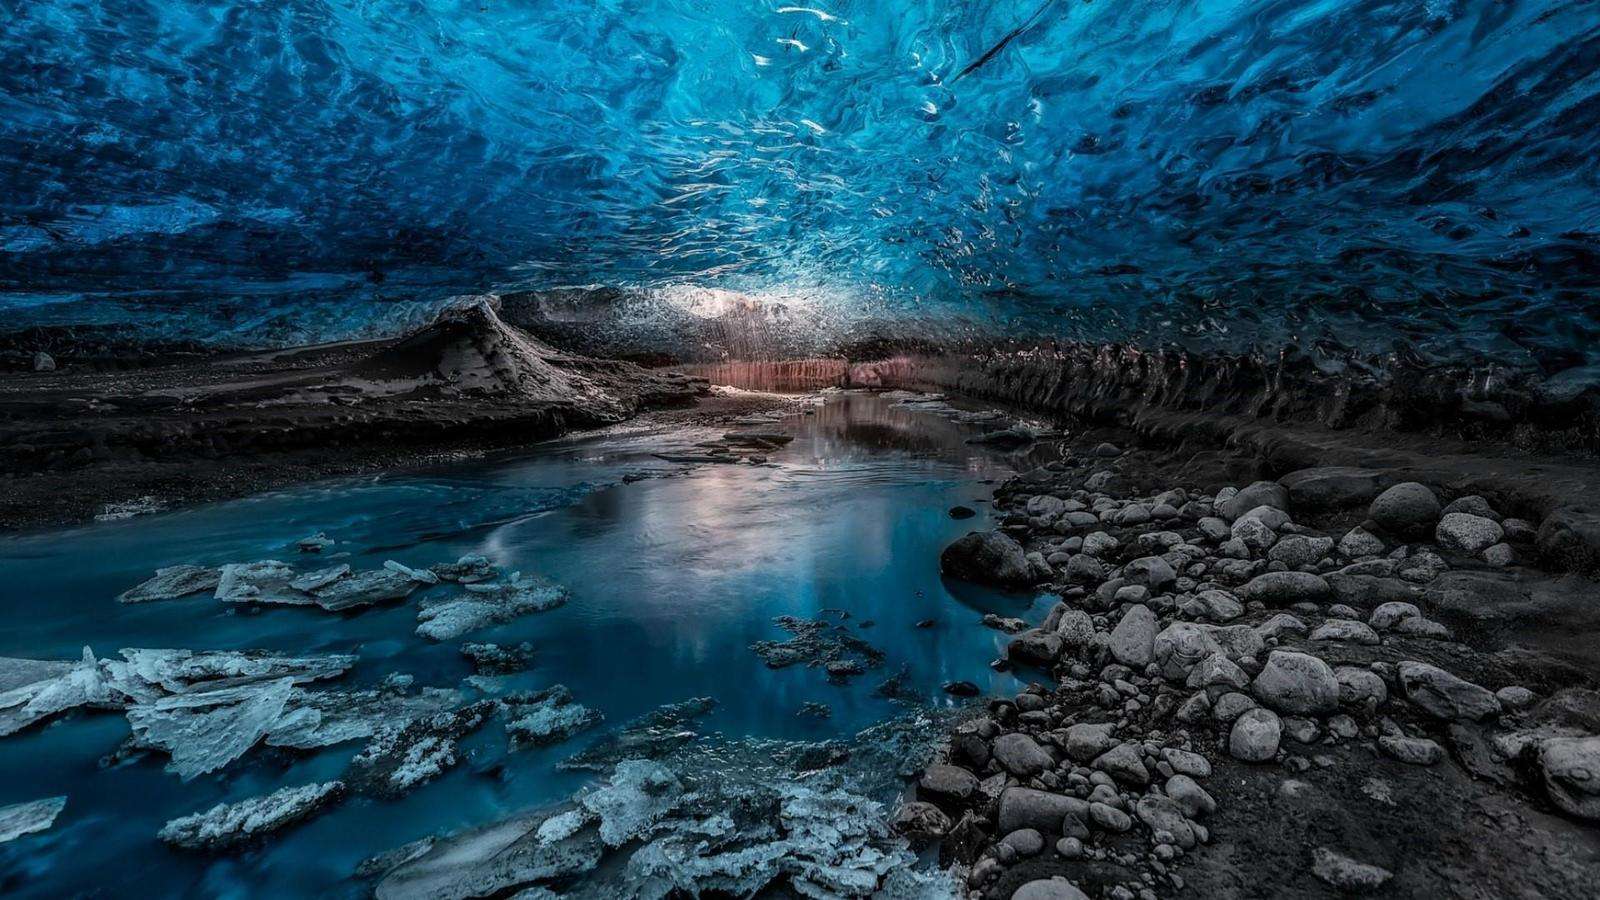 Blue Tone Cave 3 puzzle online from photo